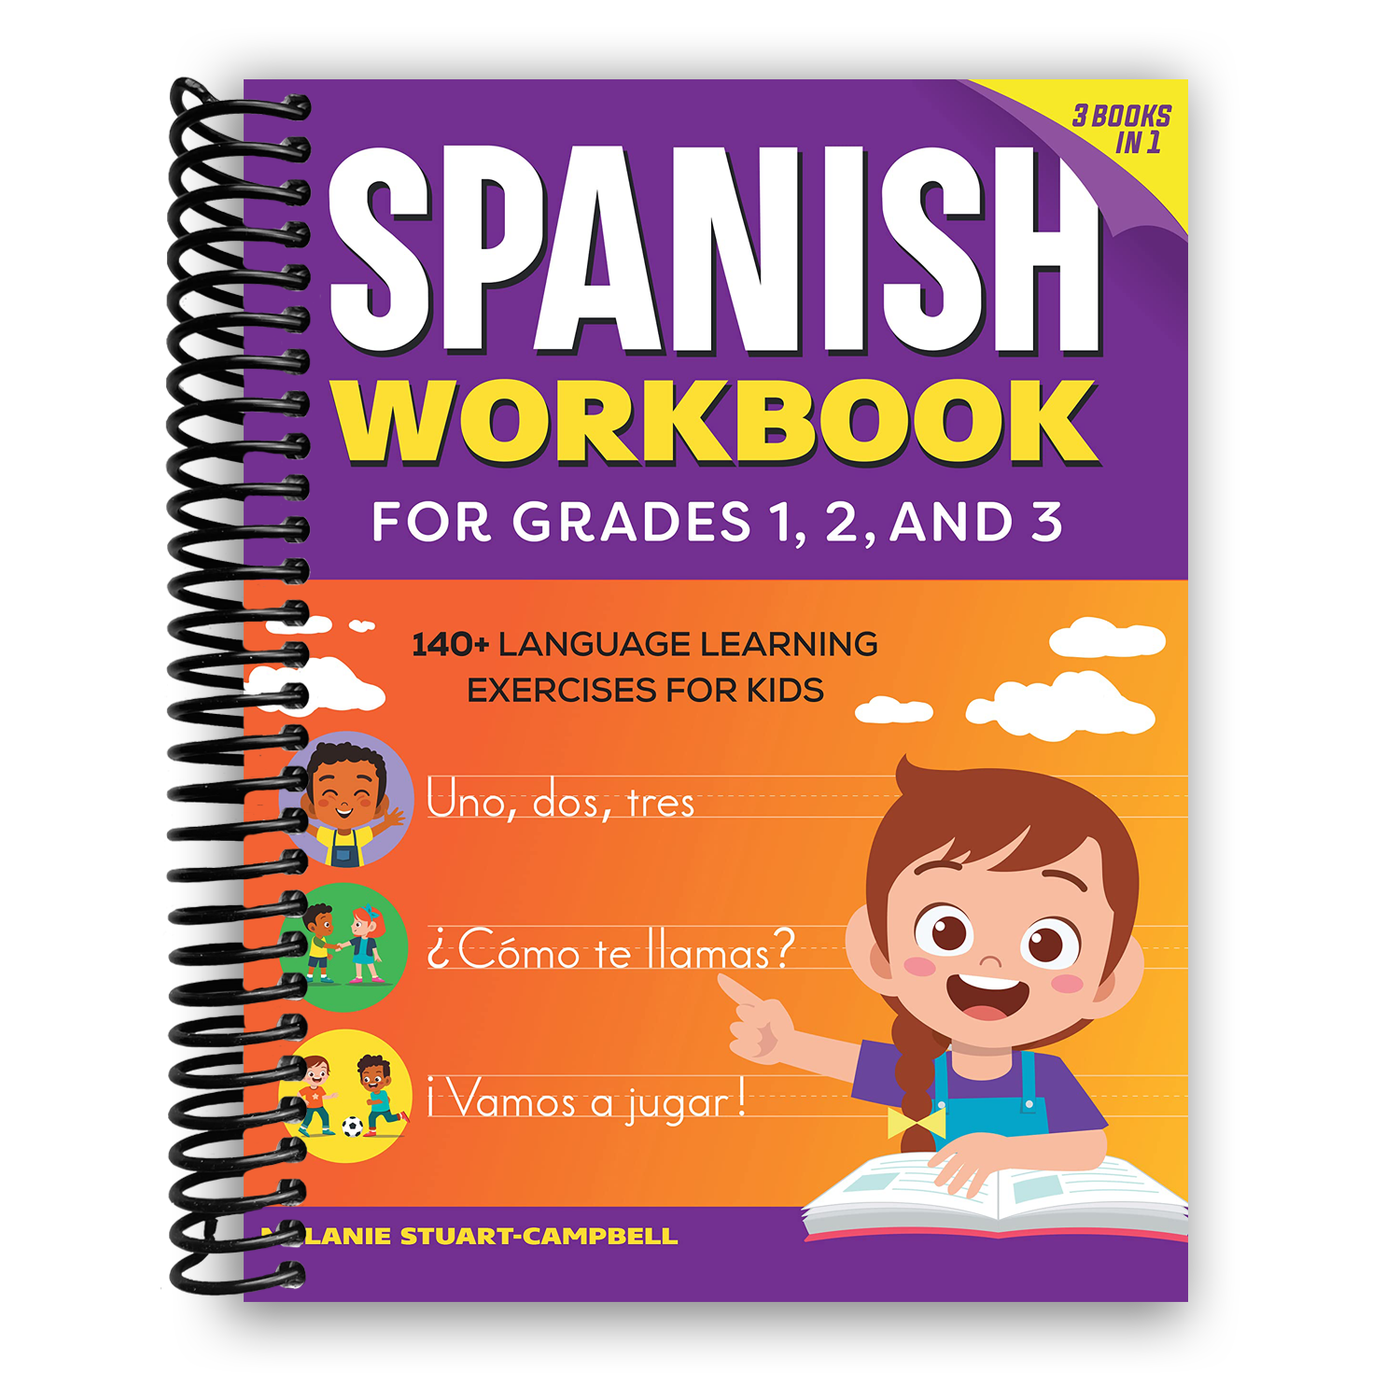 The Spanish Workbook for Grades 1, 2, and 3: 140+ Language Learning Exercises for Kids Ages 6-9 (Spiral Bound)